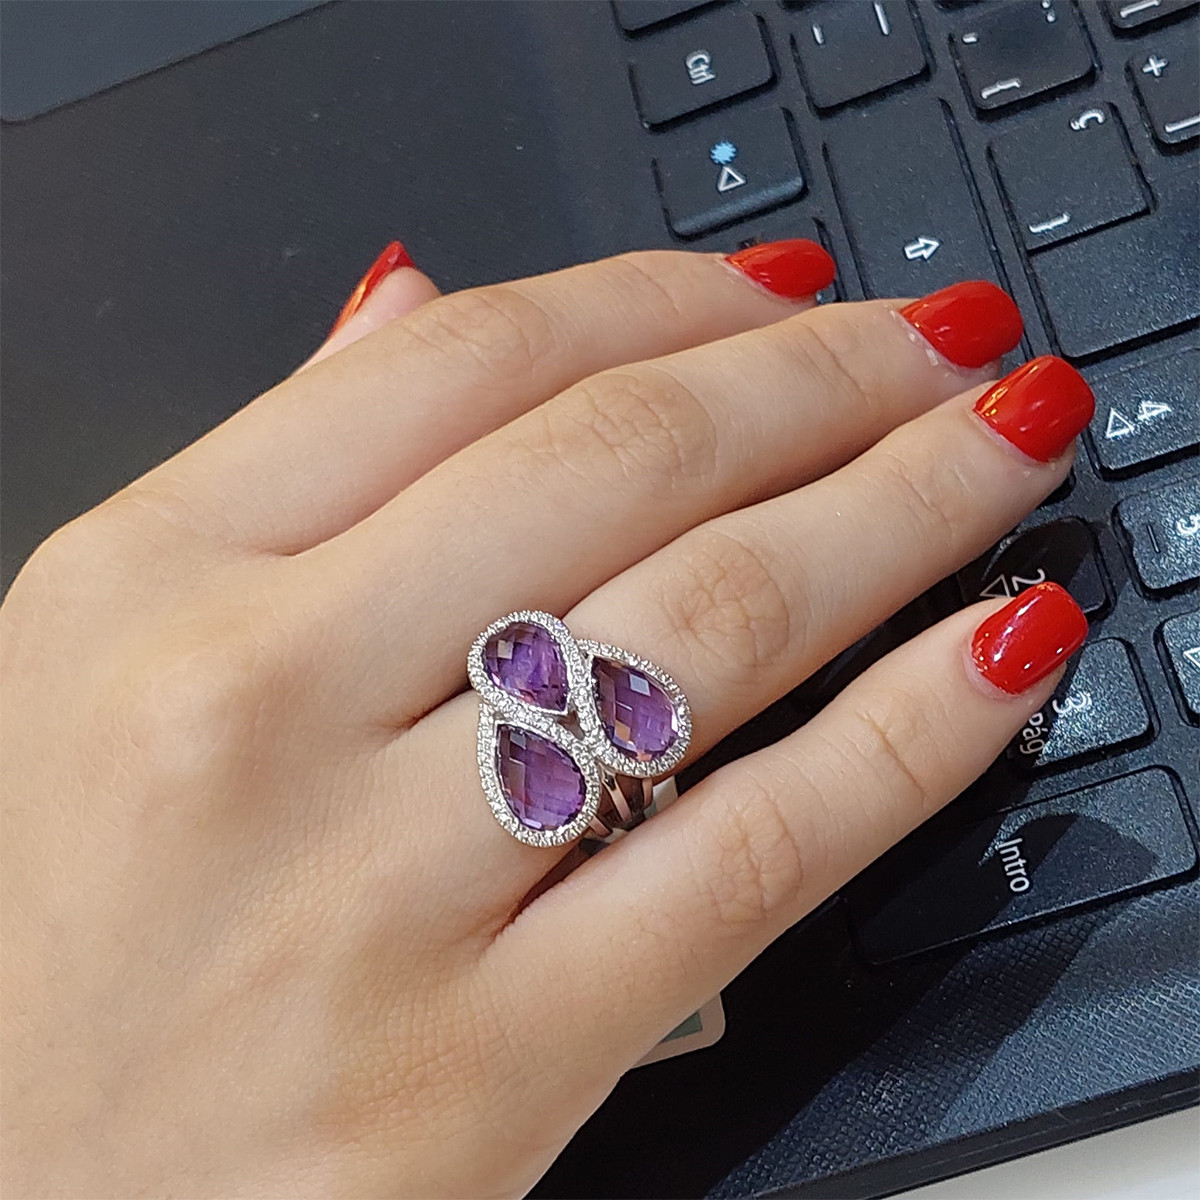 GOLD 3 AMETHYST AND DIAMONDS RING